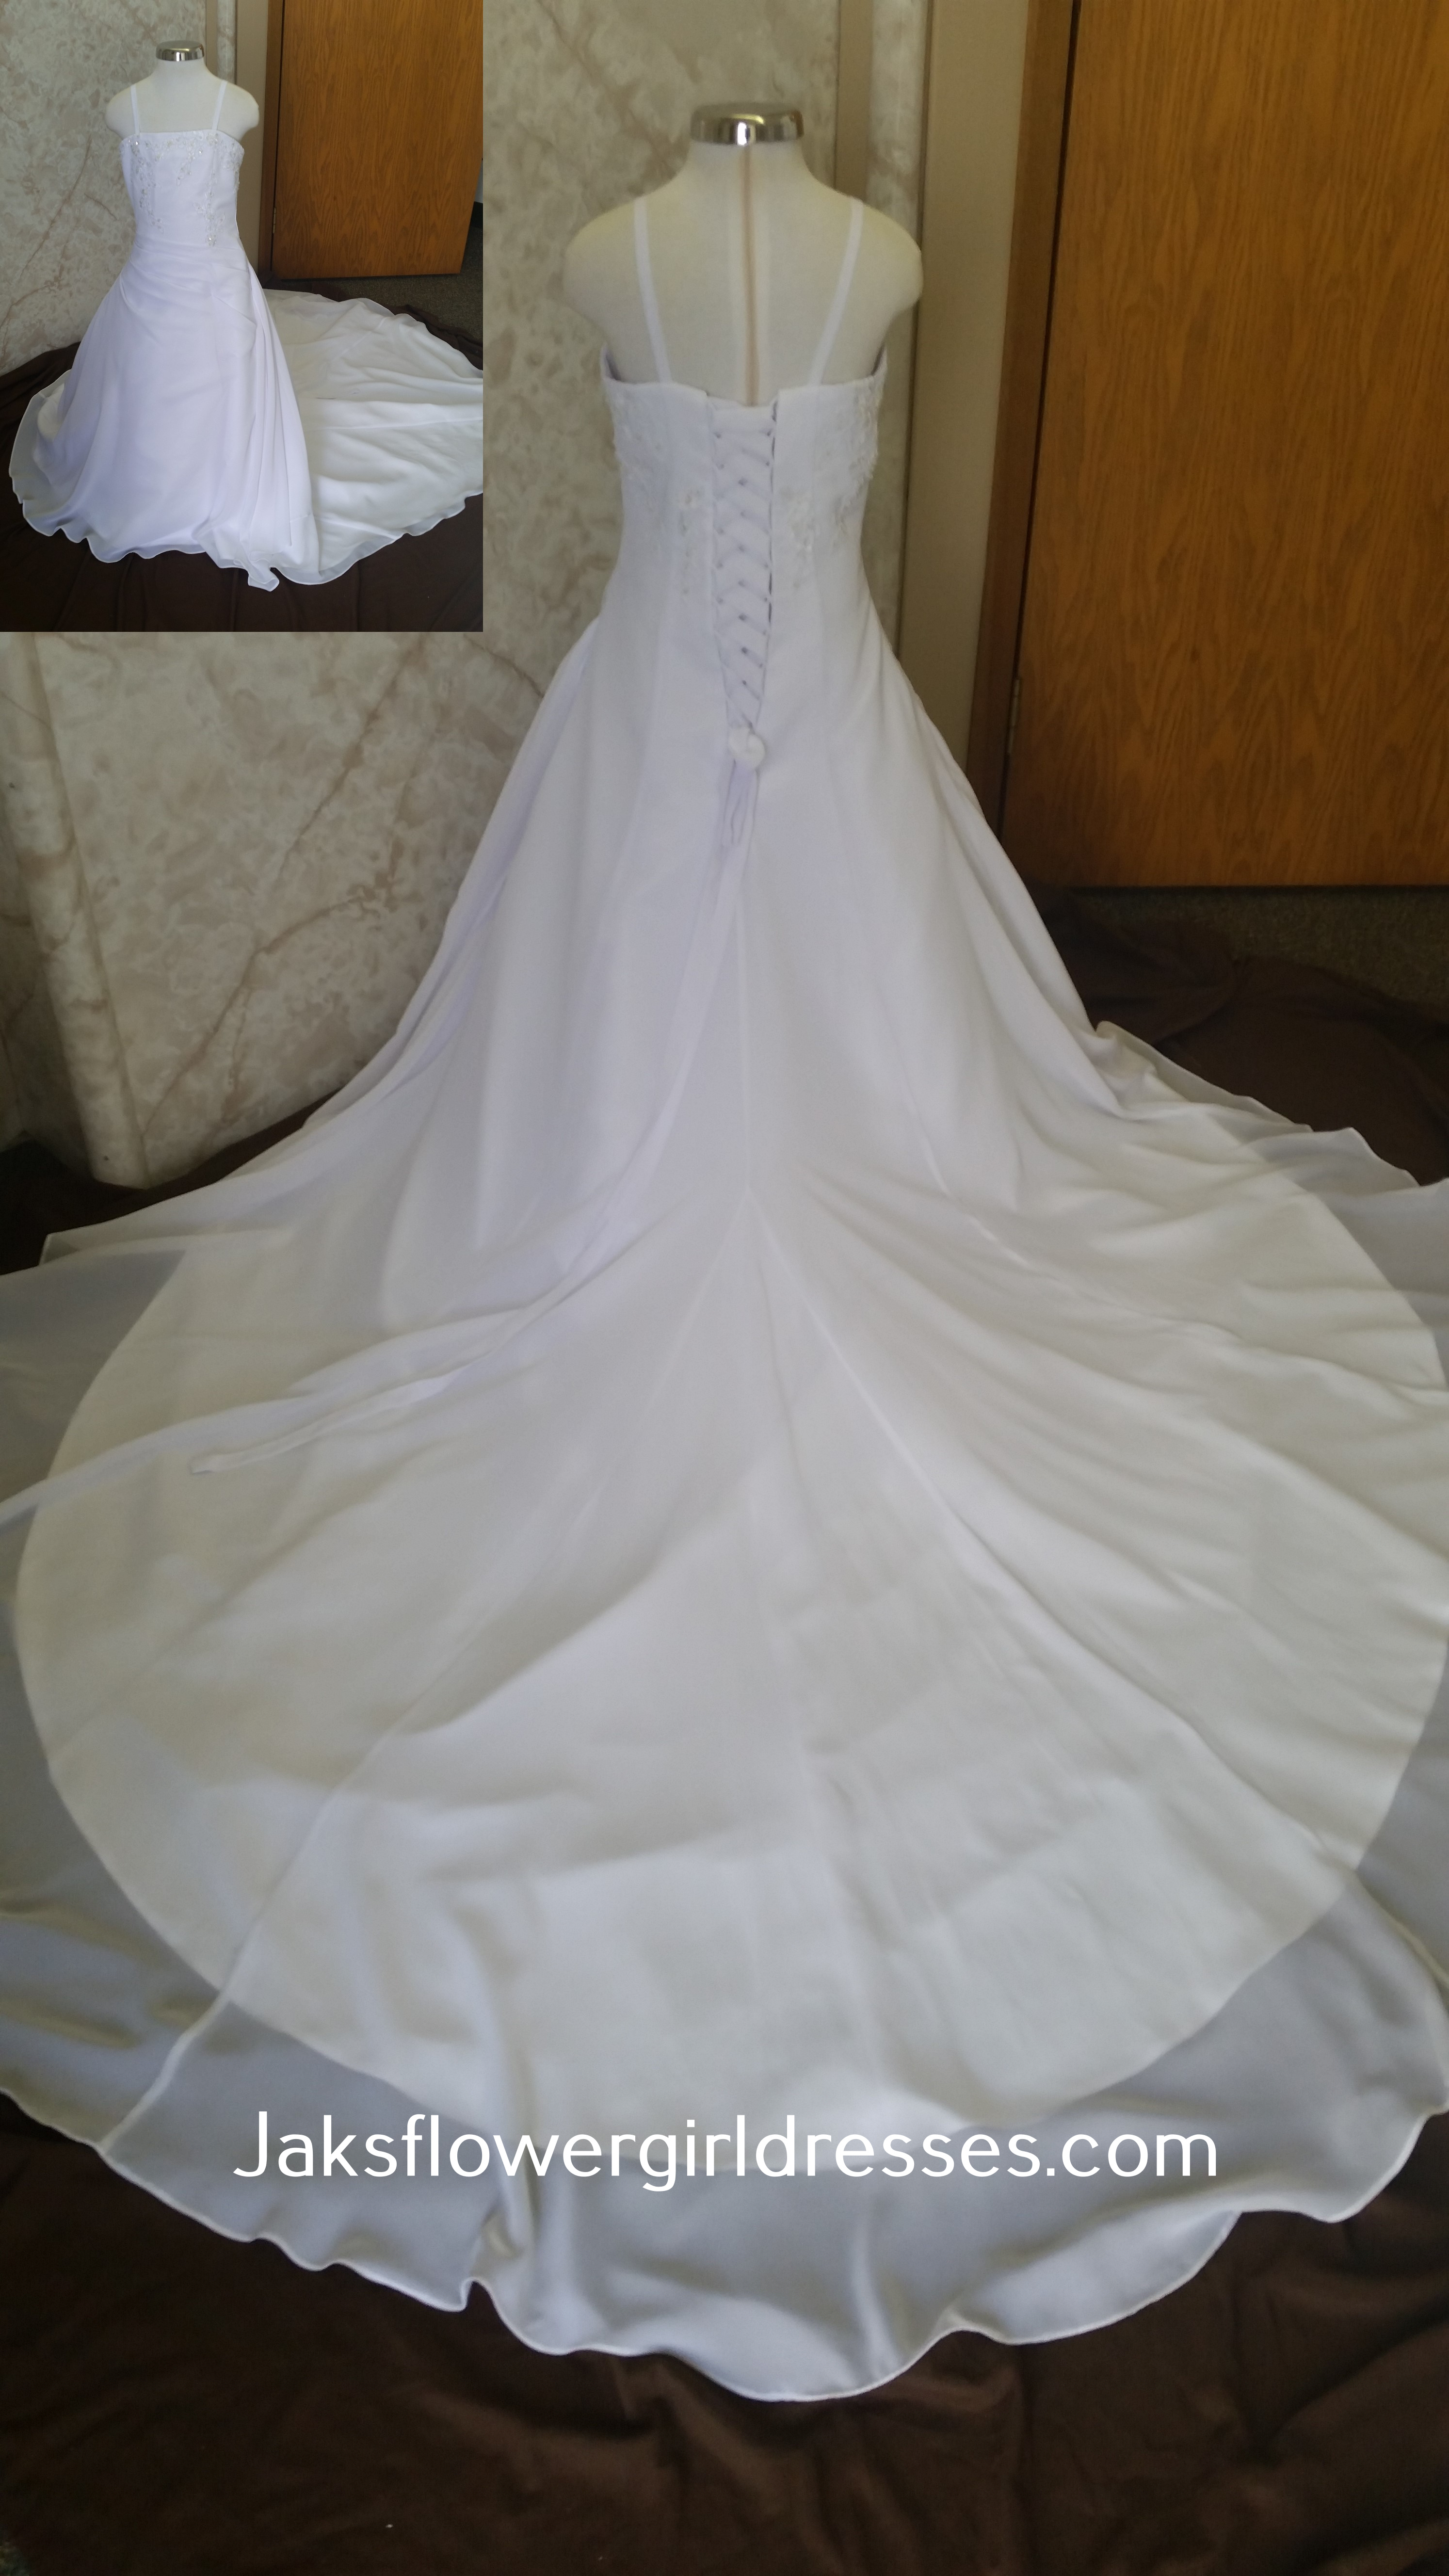 12 month size wedding gown